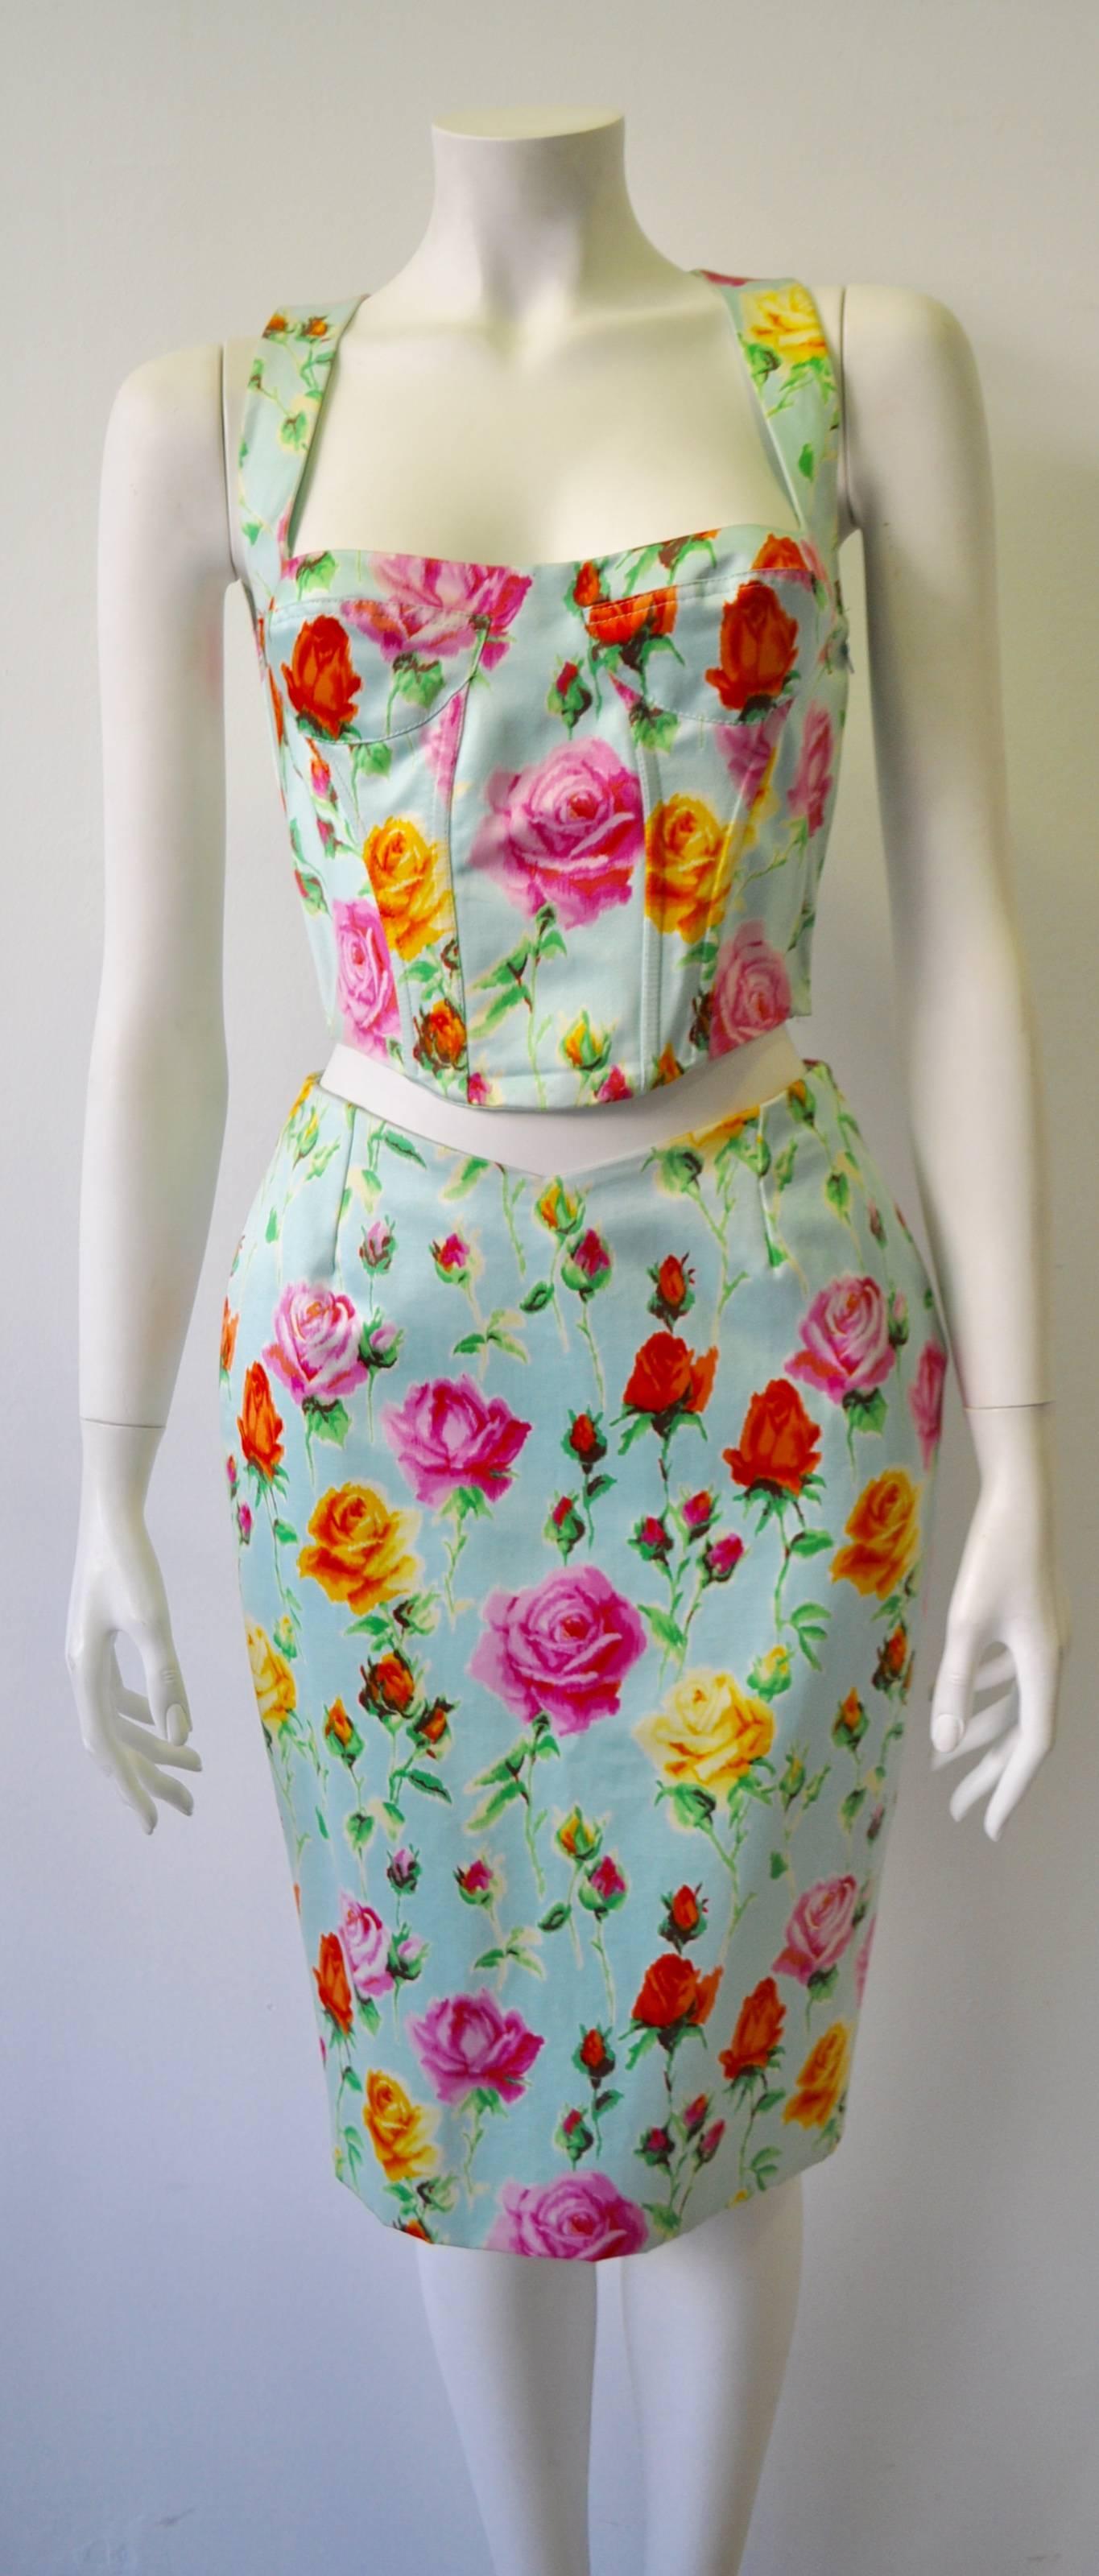 Gianni Versace Couture Floral Bustier and Pencil Skirt Ensemble, Spring 1995 Collection